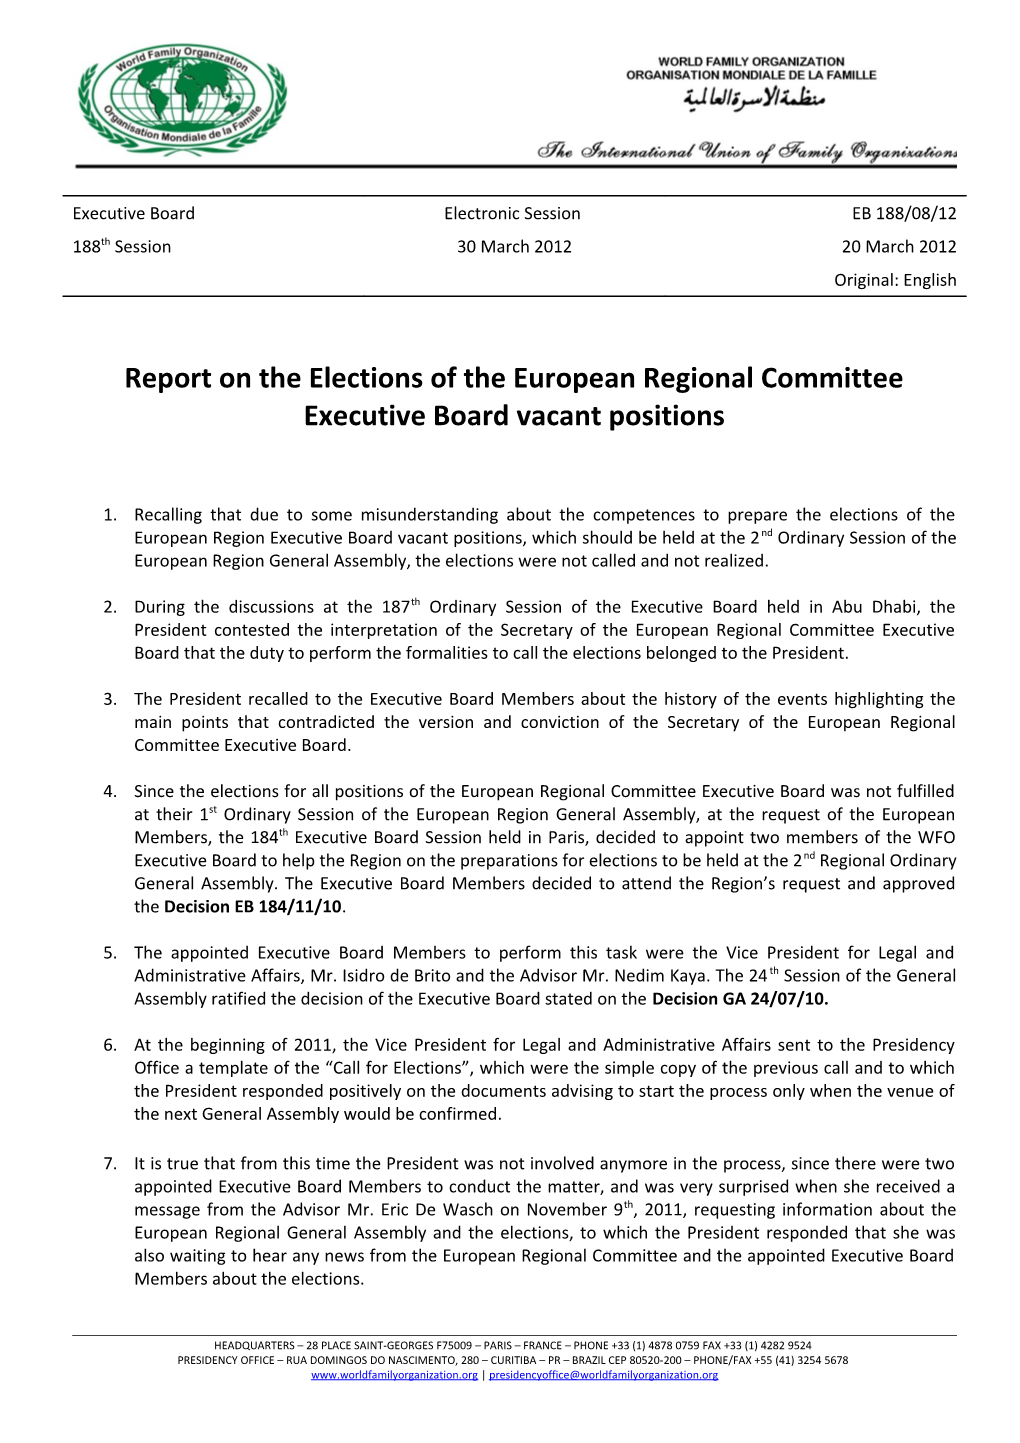 Report on the Elections of the European Regional Committee Executive Board Vacant Positions